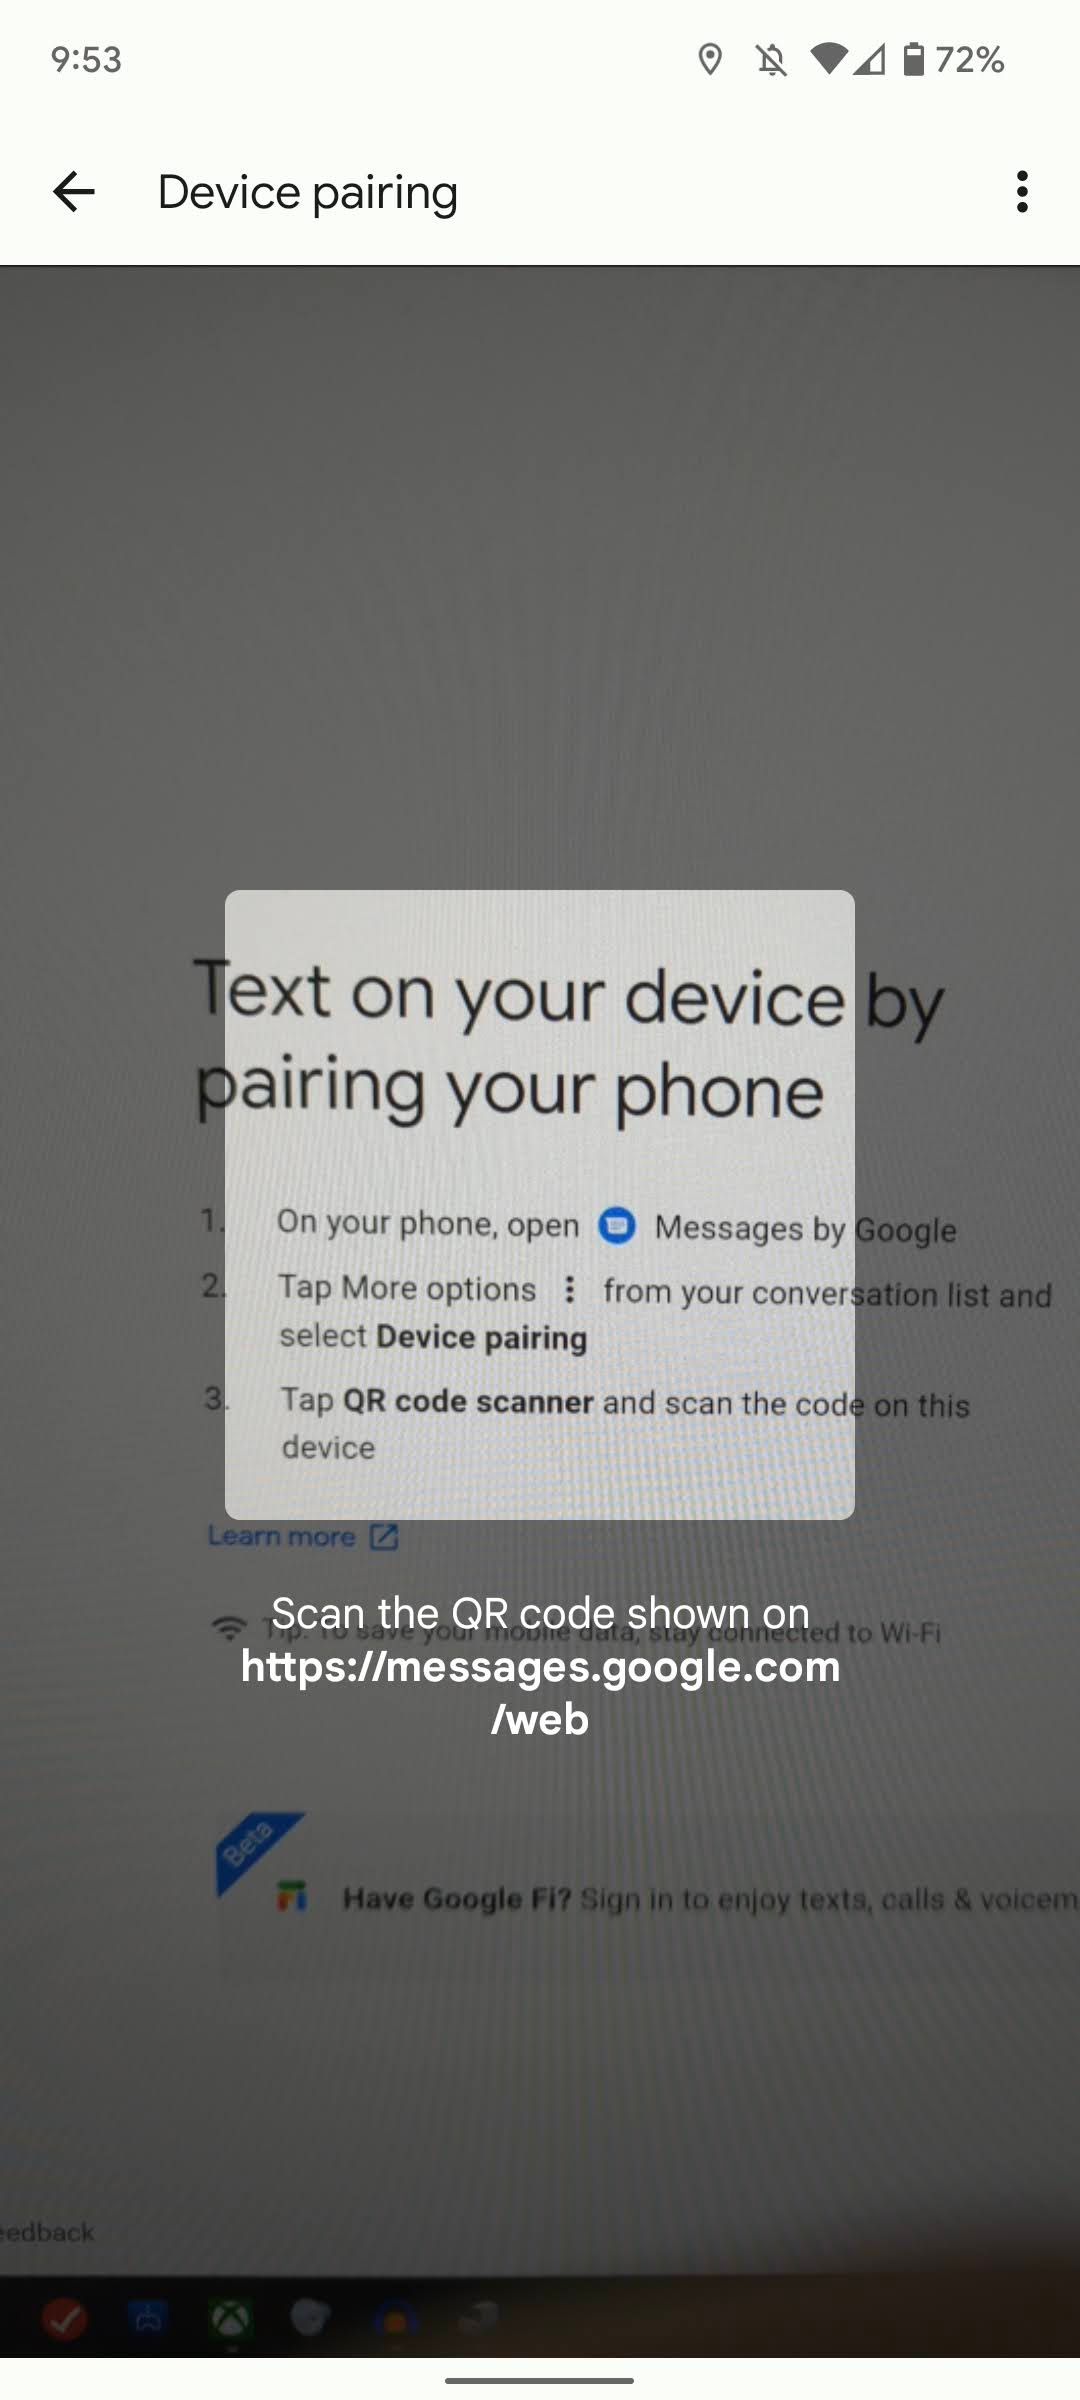 A photo scanning the QR code from the desktop interface on the web